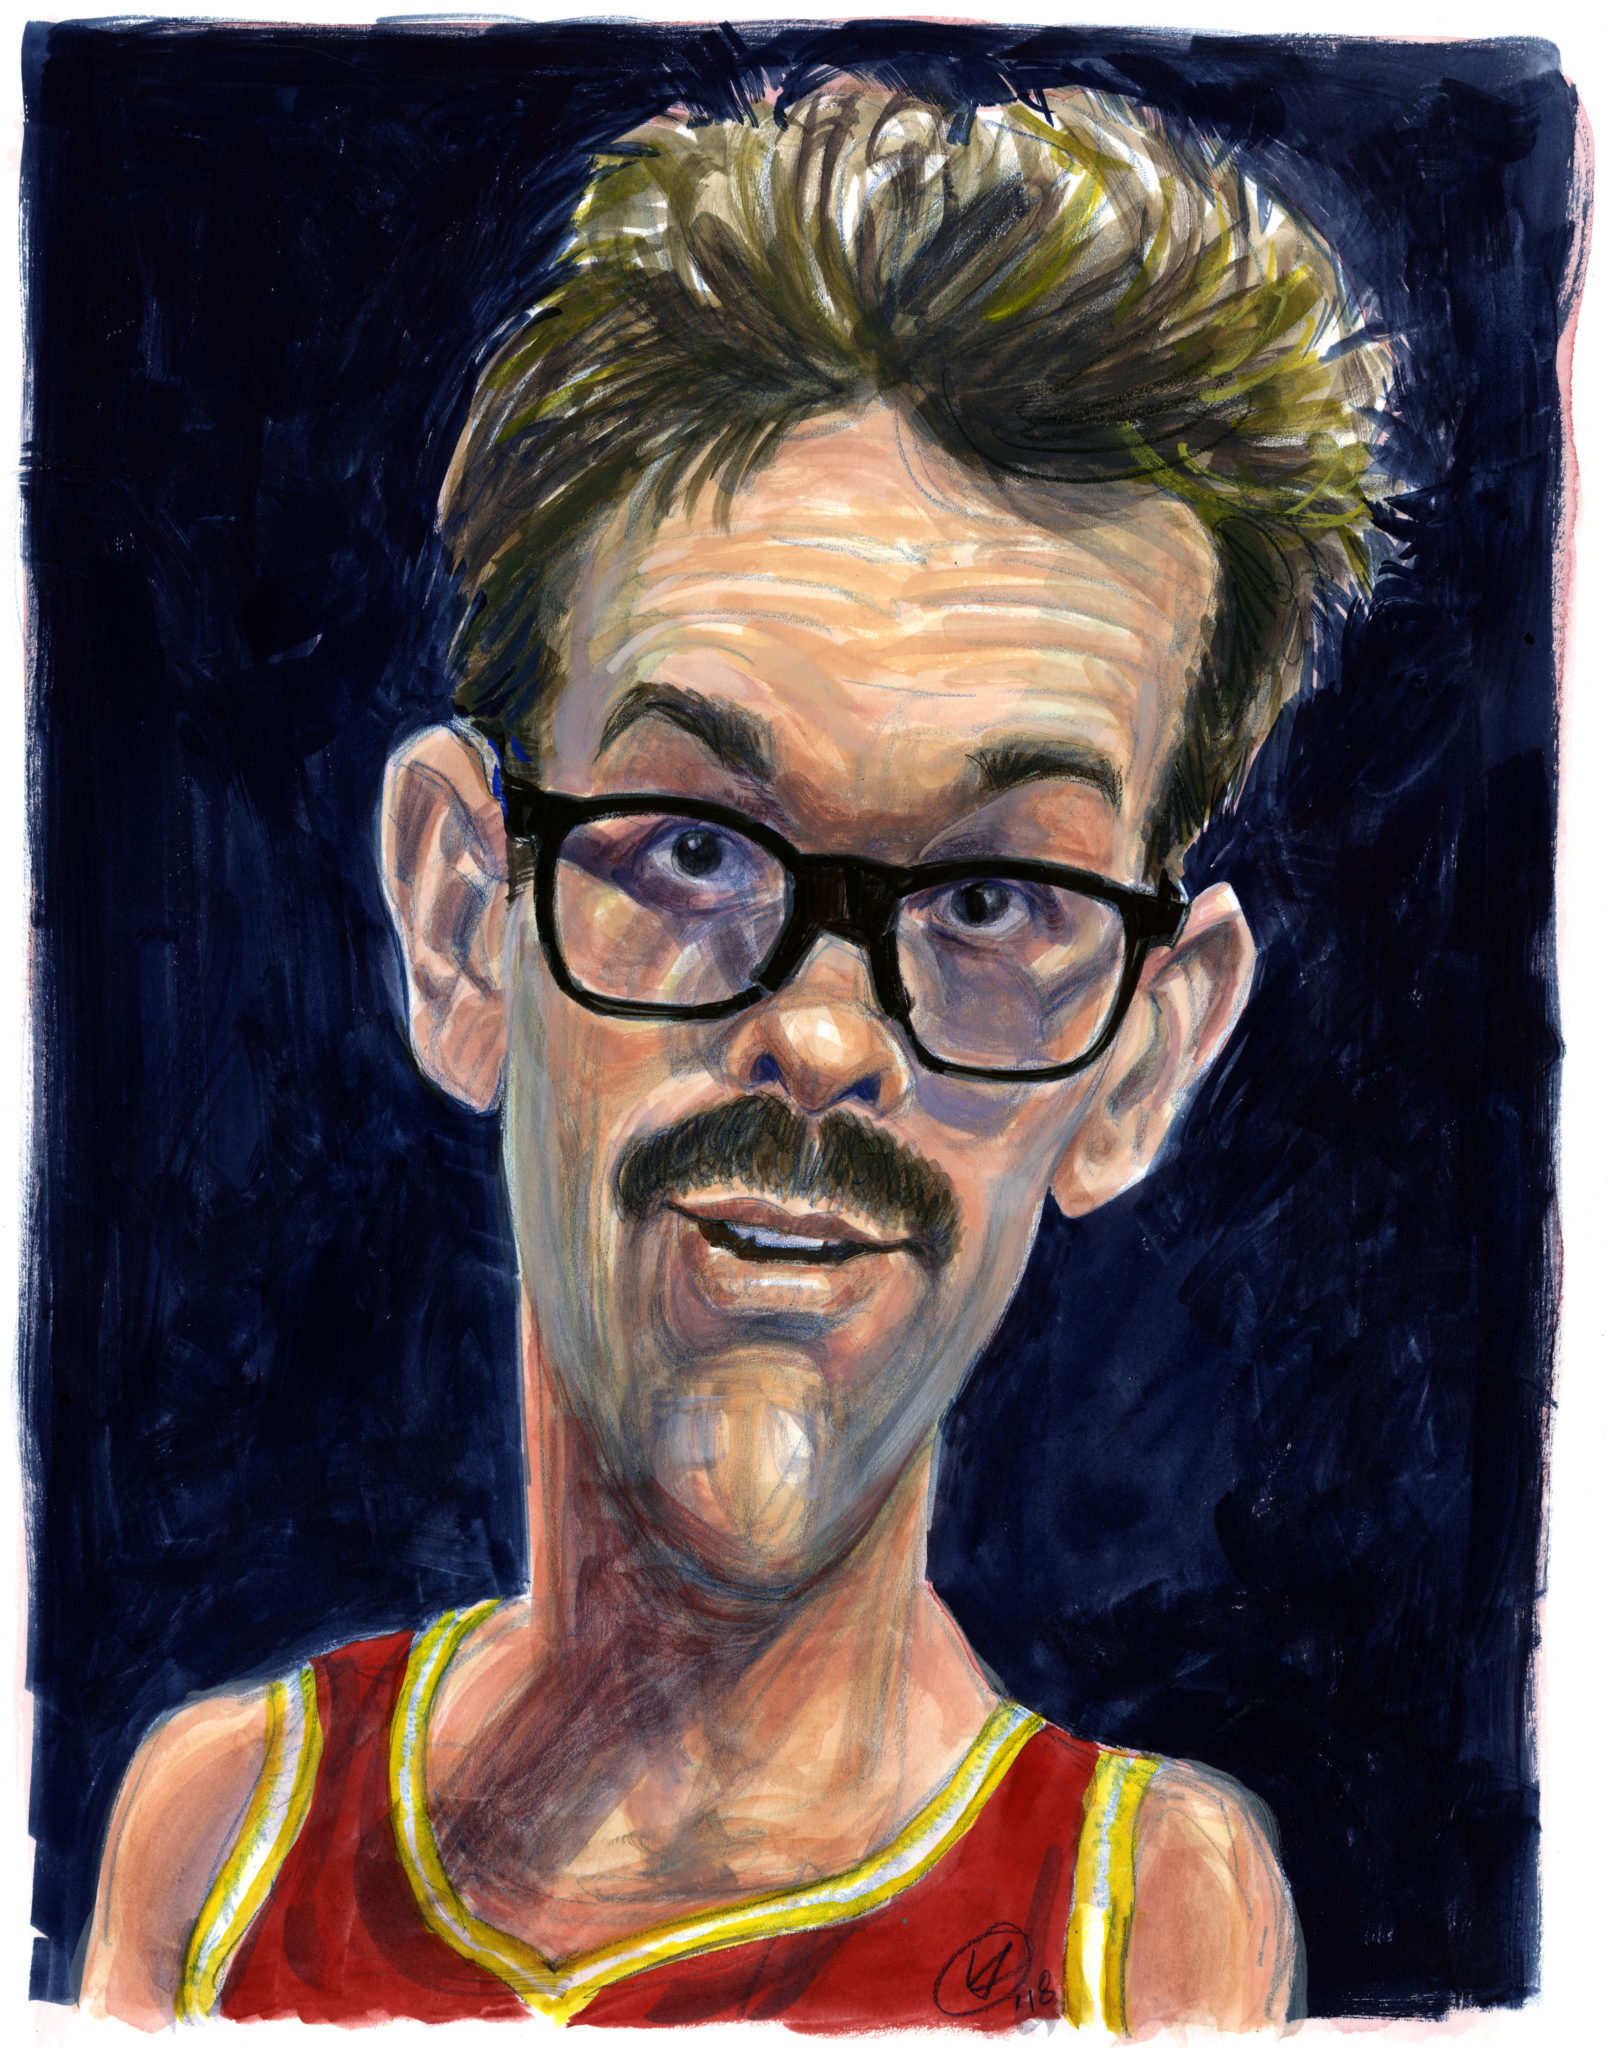 Rambis by Rambis illustration by Juhasz